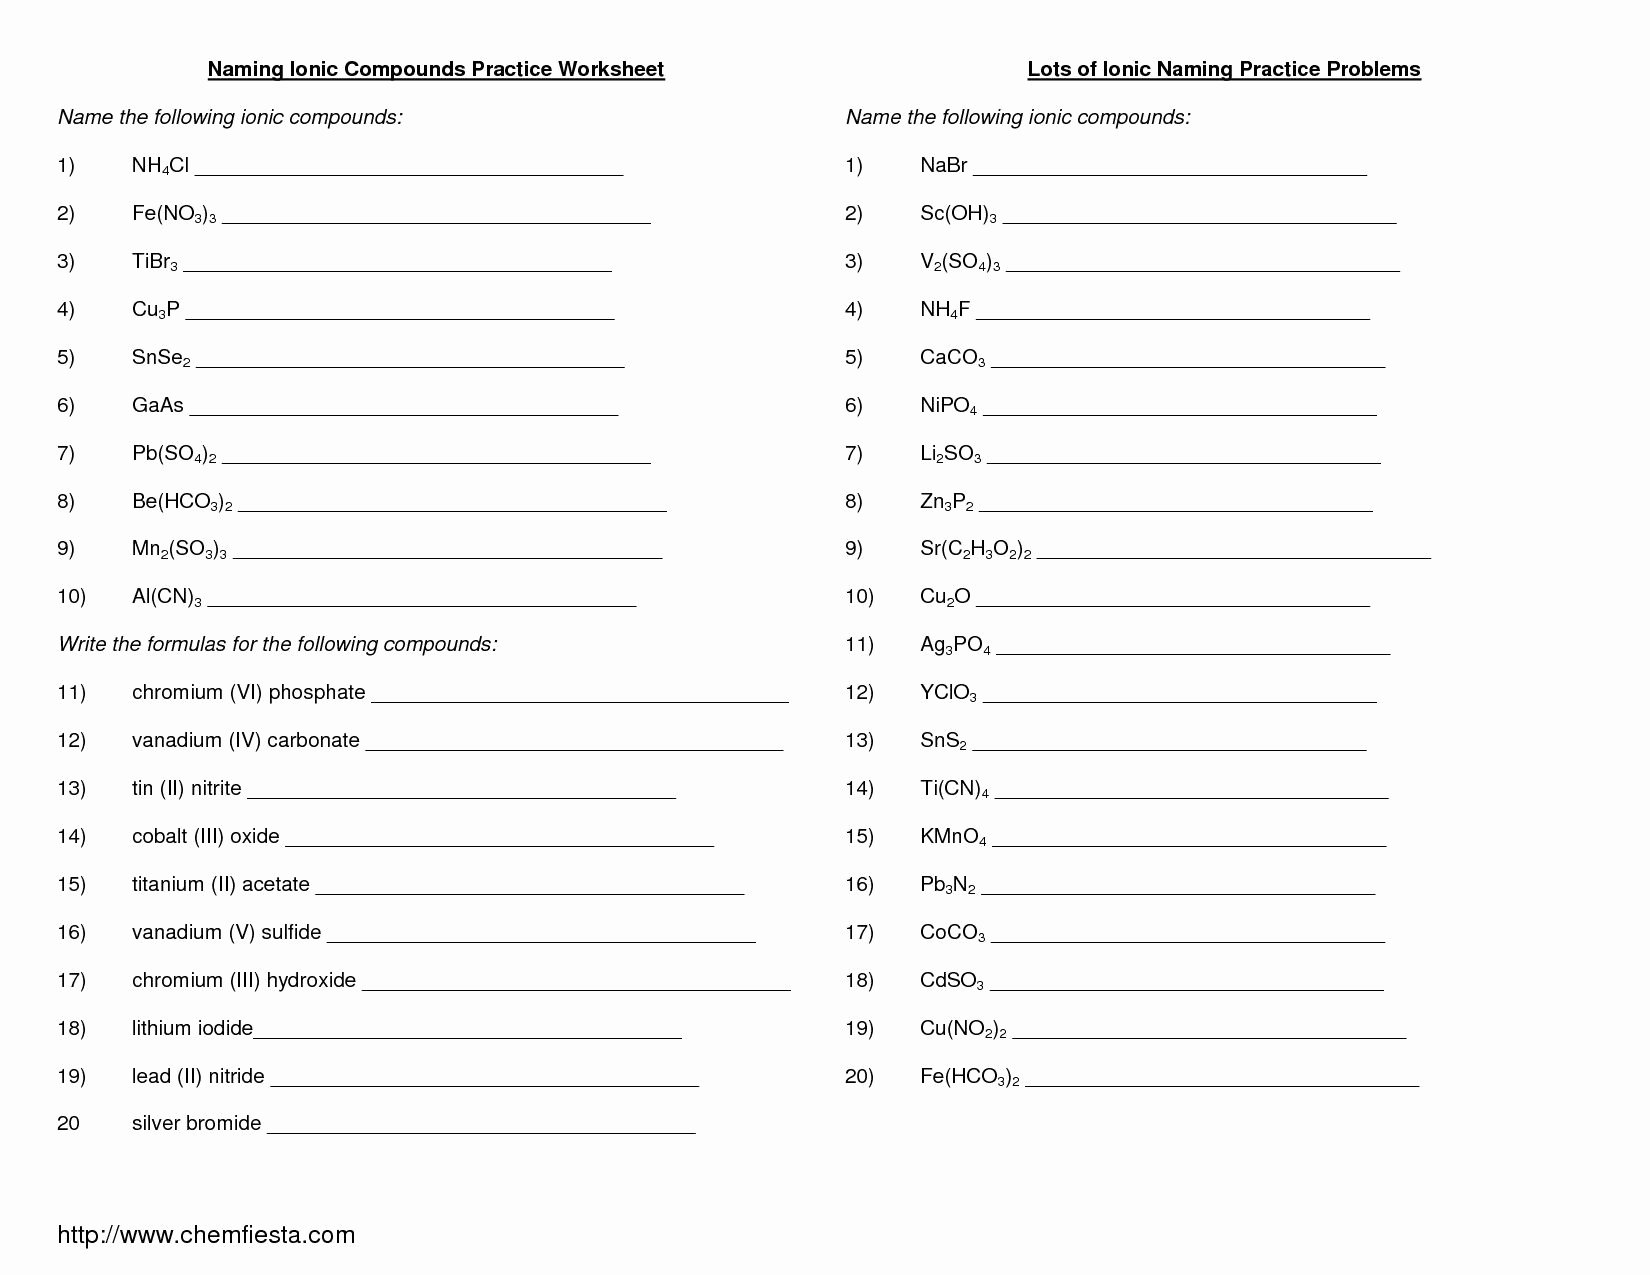 Simple Binary Ionic Compounds Worksheet Elegant formulas and Nomenclature Binary Ionic Pounds Worksheet